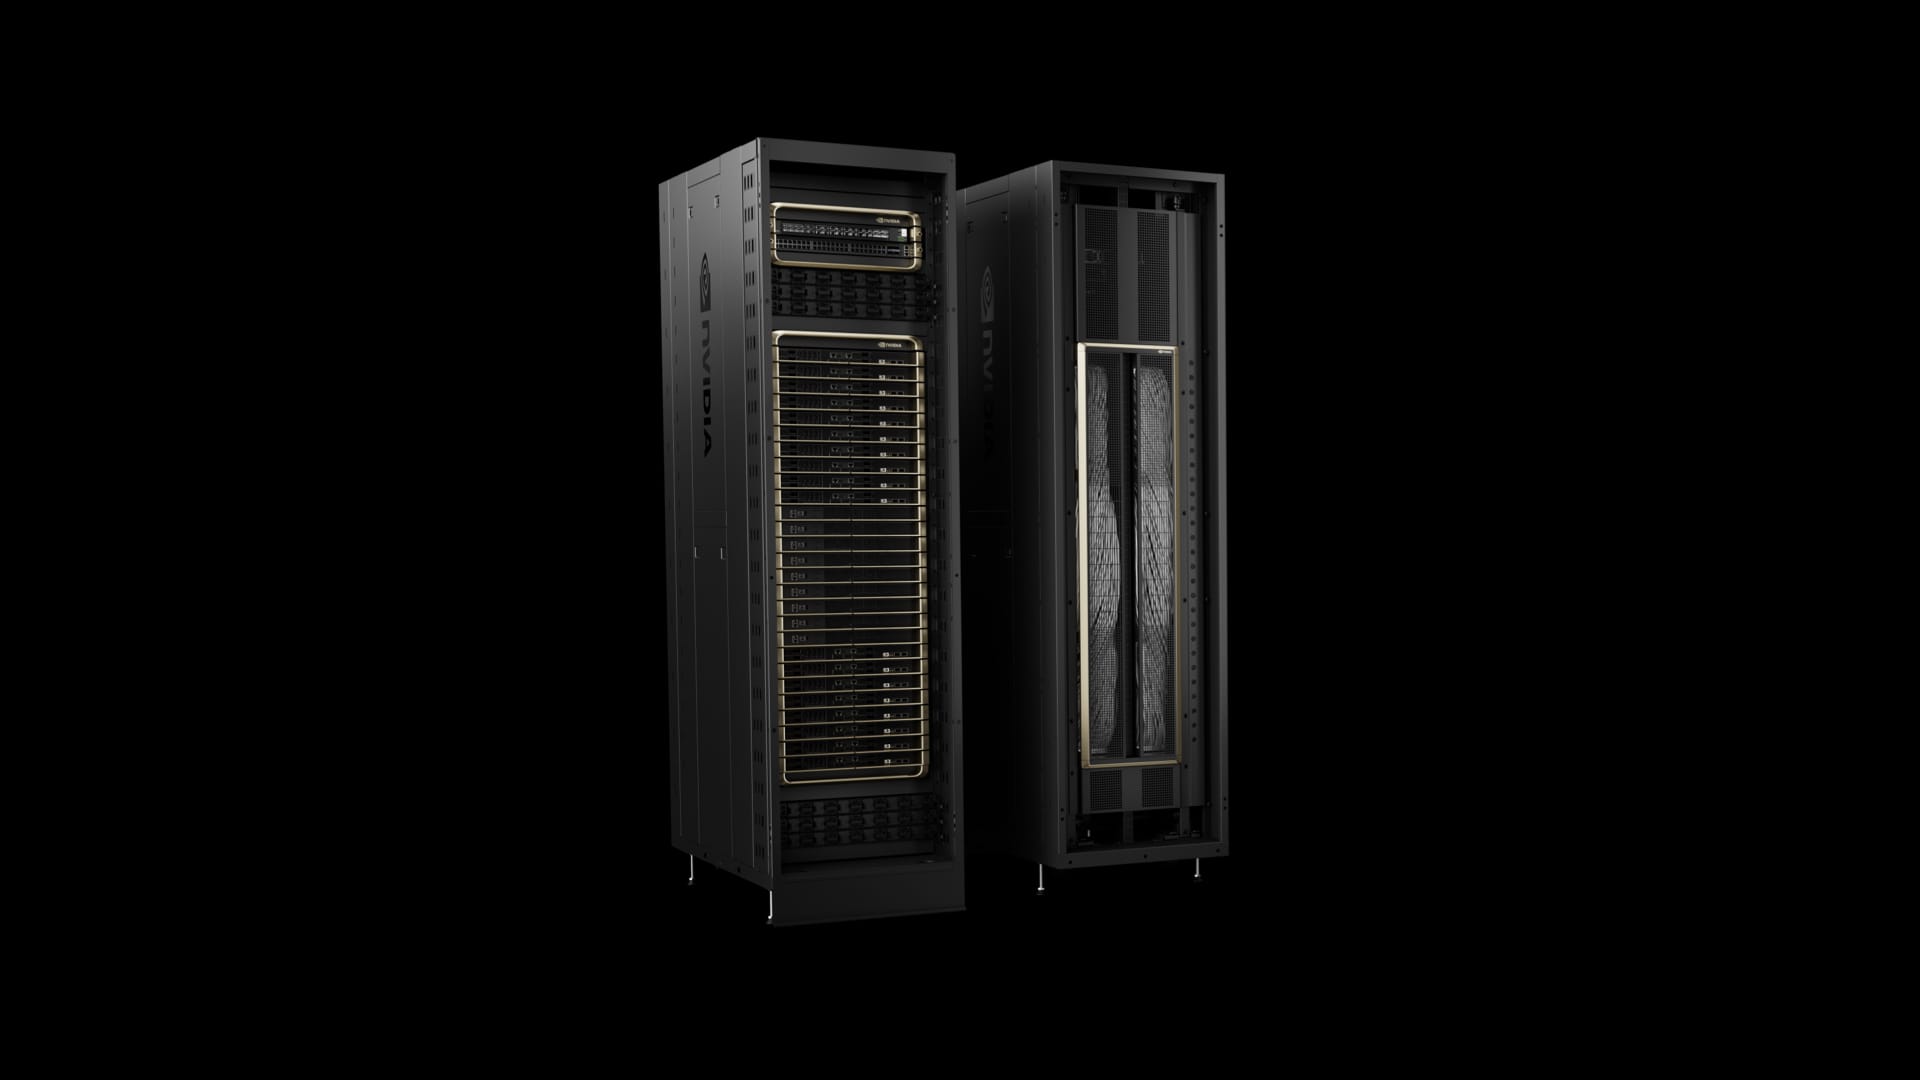 Nvidia will also sell B200 graphics processors as part of a complete system that takes up an entire server rack.